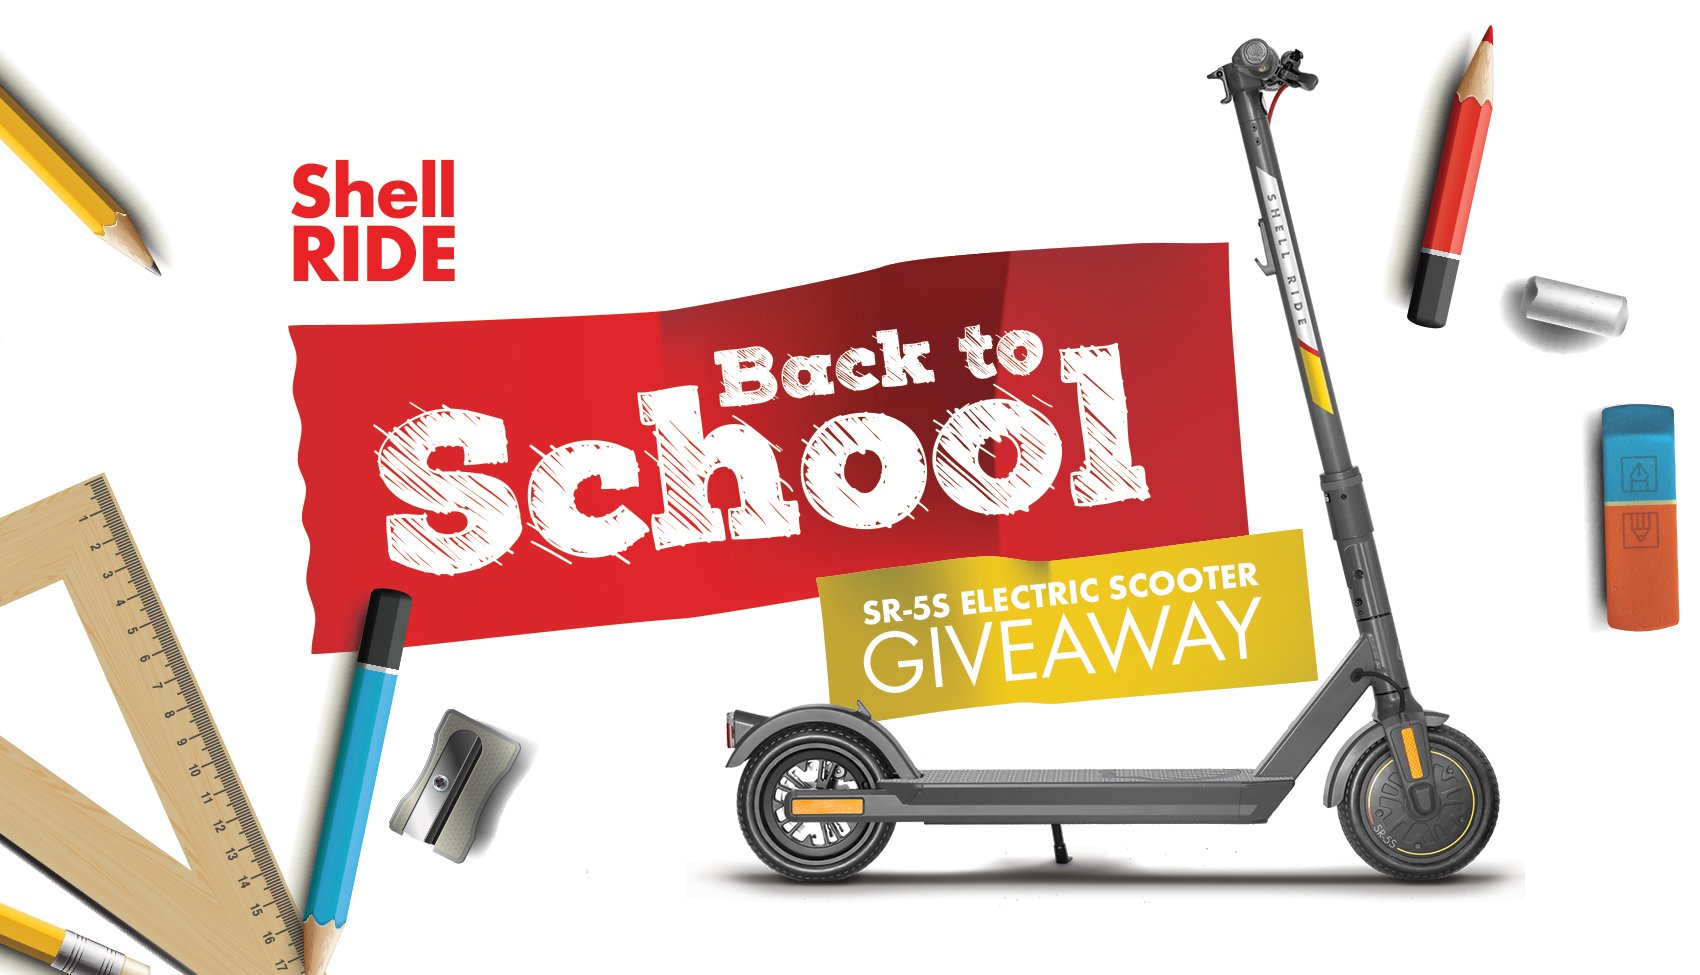 sr-5s electric scooter surrounded by school supplies and a back to school electric scooter giveaway message